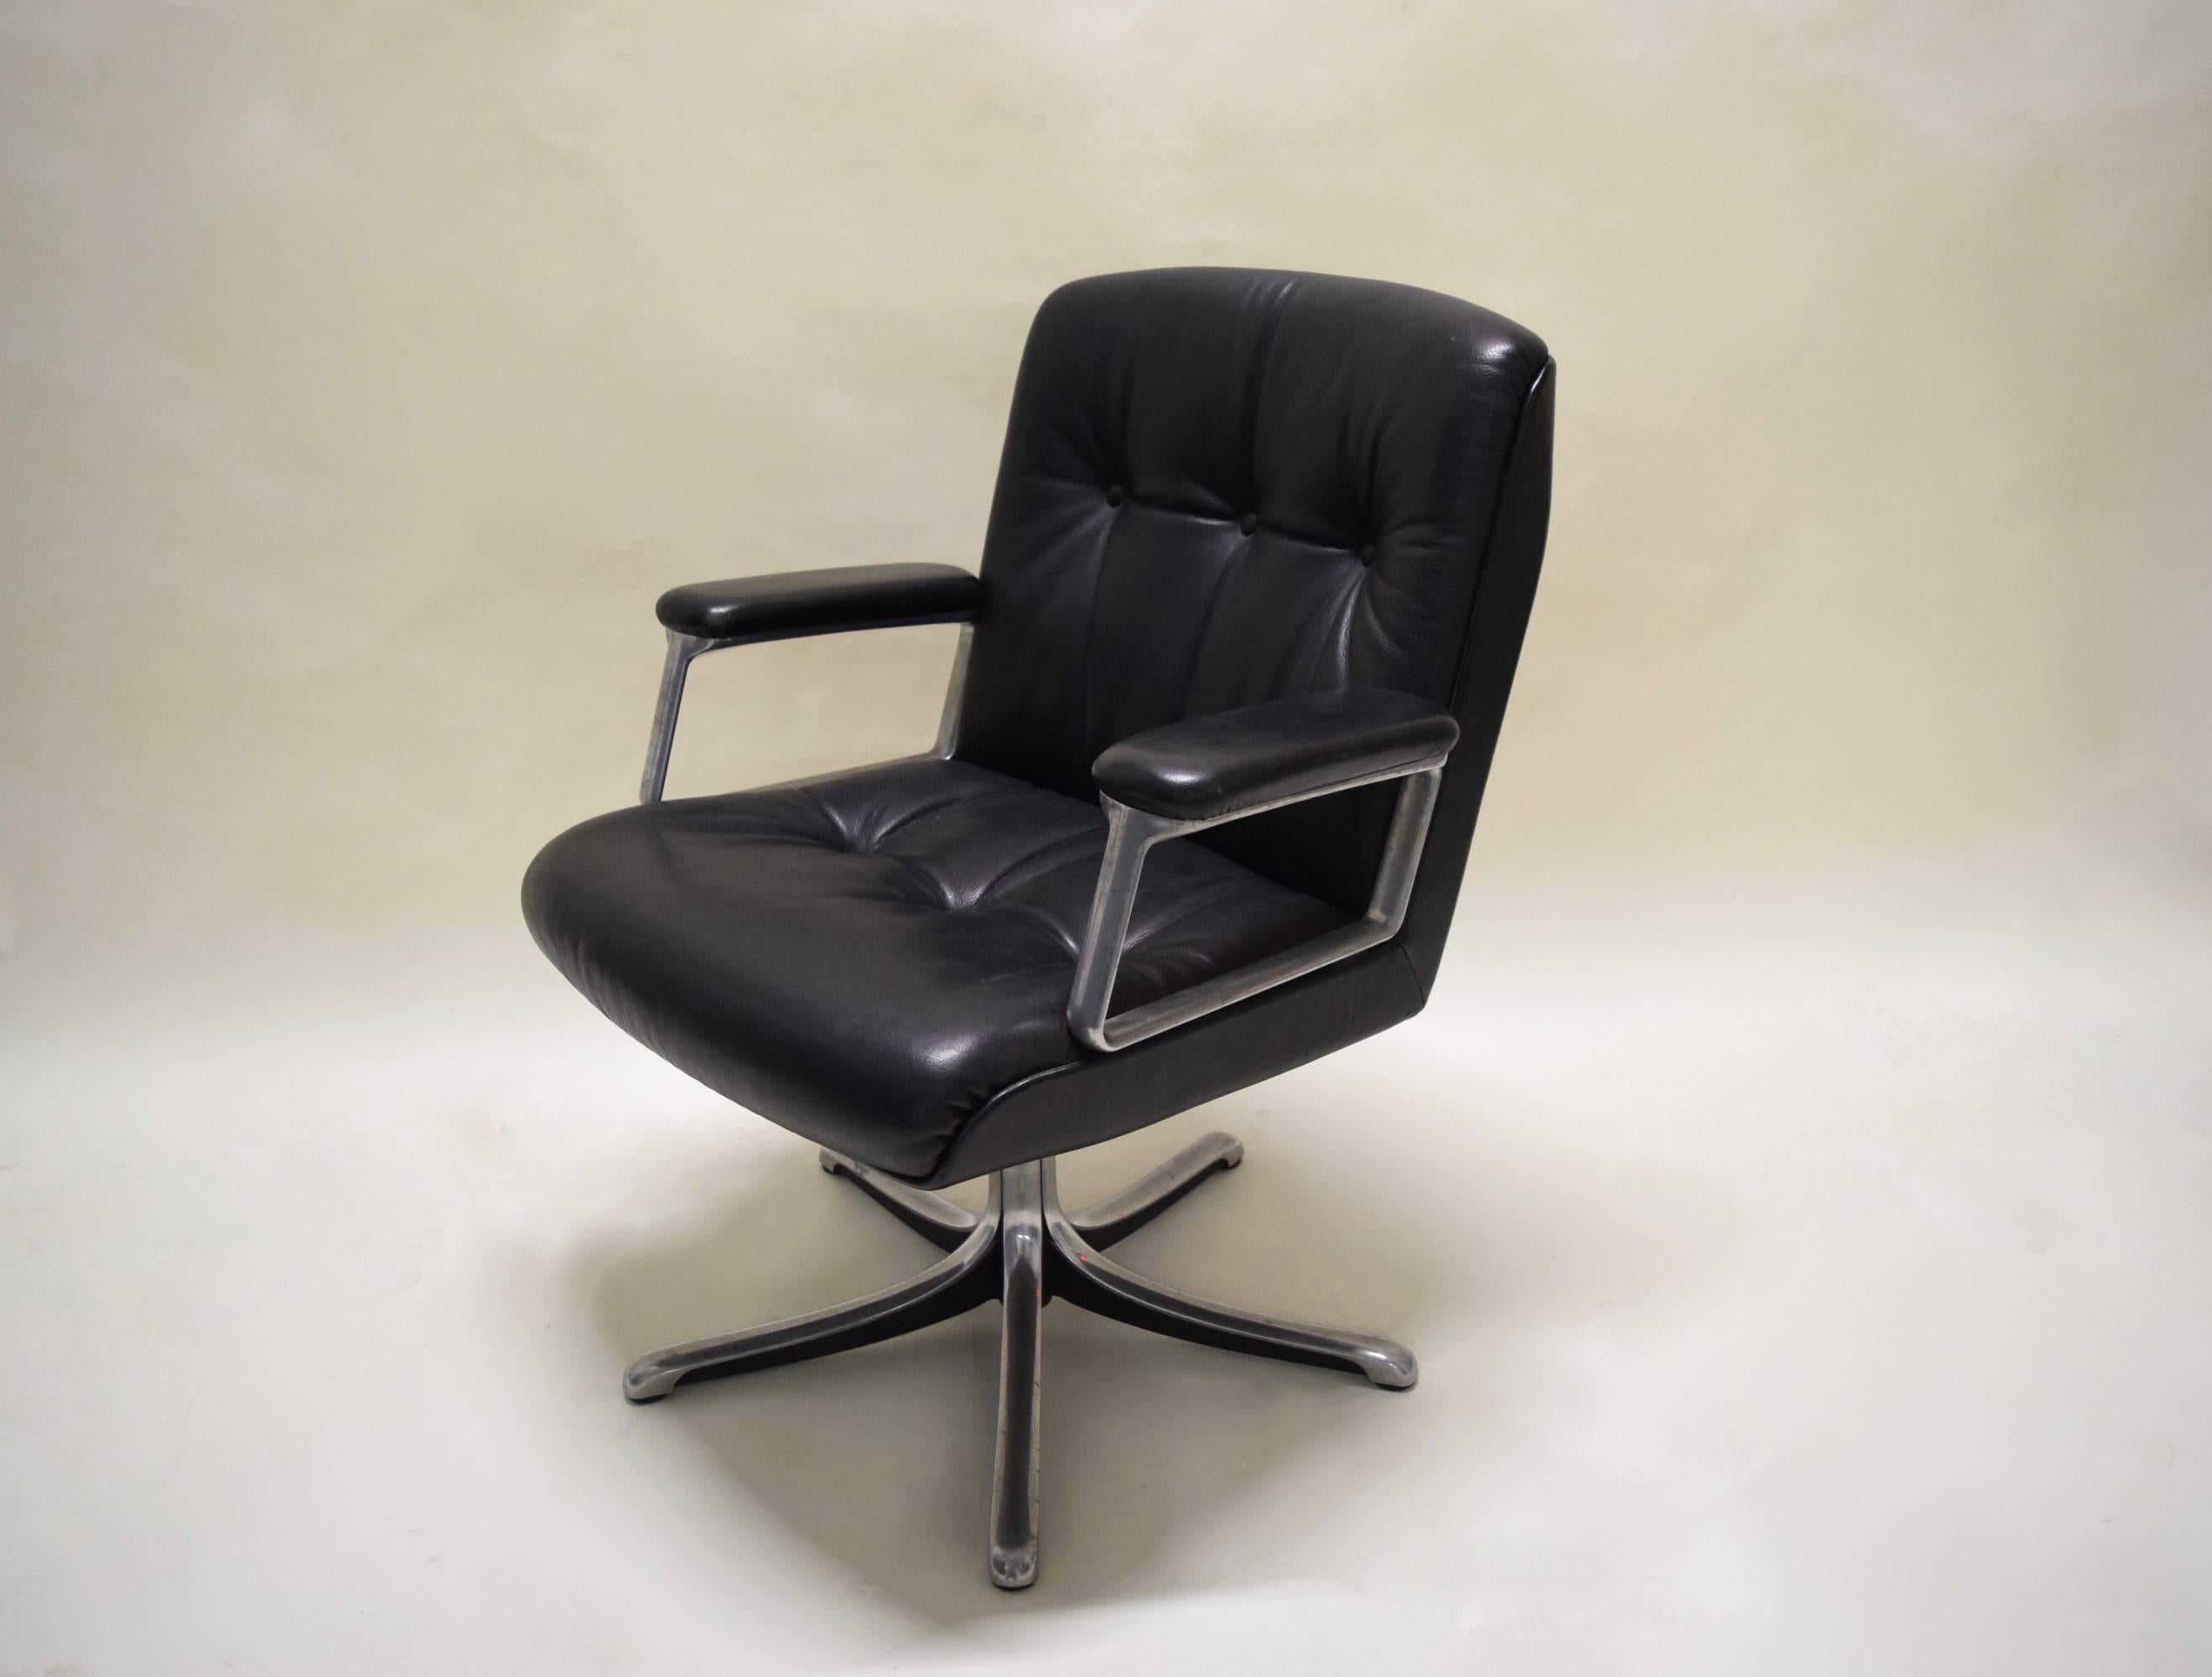 Sturdy desk or office chair in tufted black leather with arms and legs of aluminum, designed by Osvaldo Bersani for Tecno.
Measures: Arm height: 60 cm or about 23 5/8